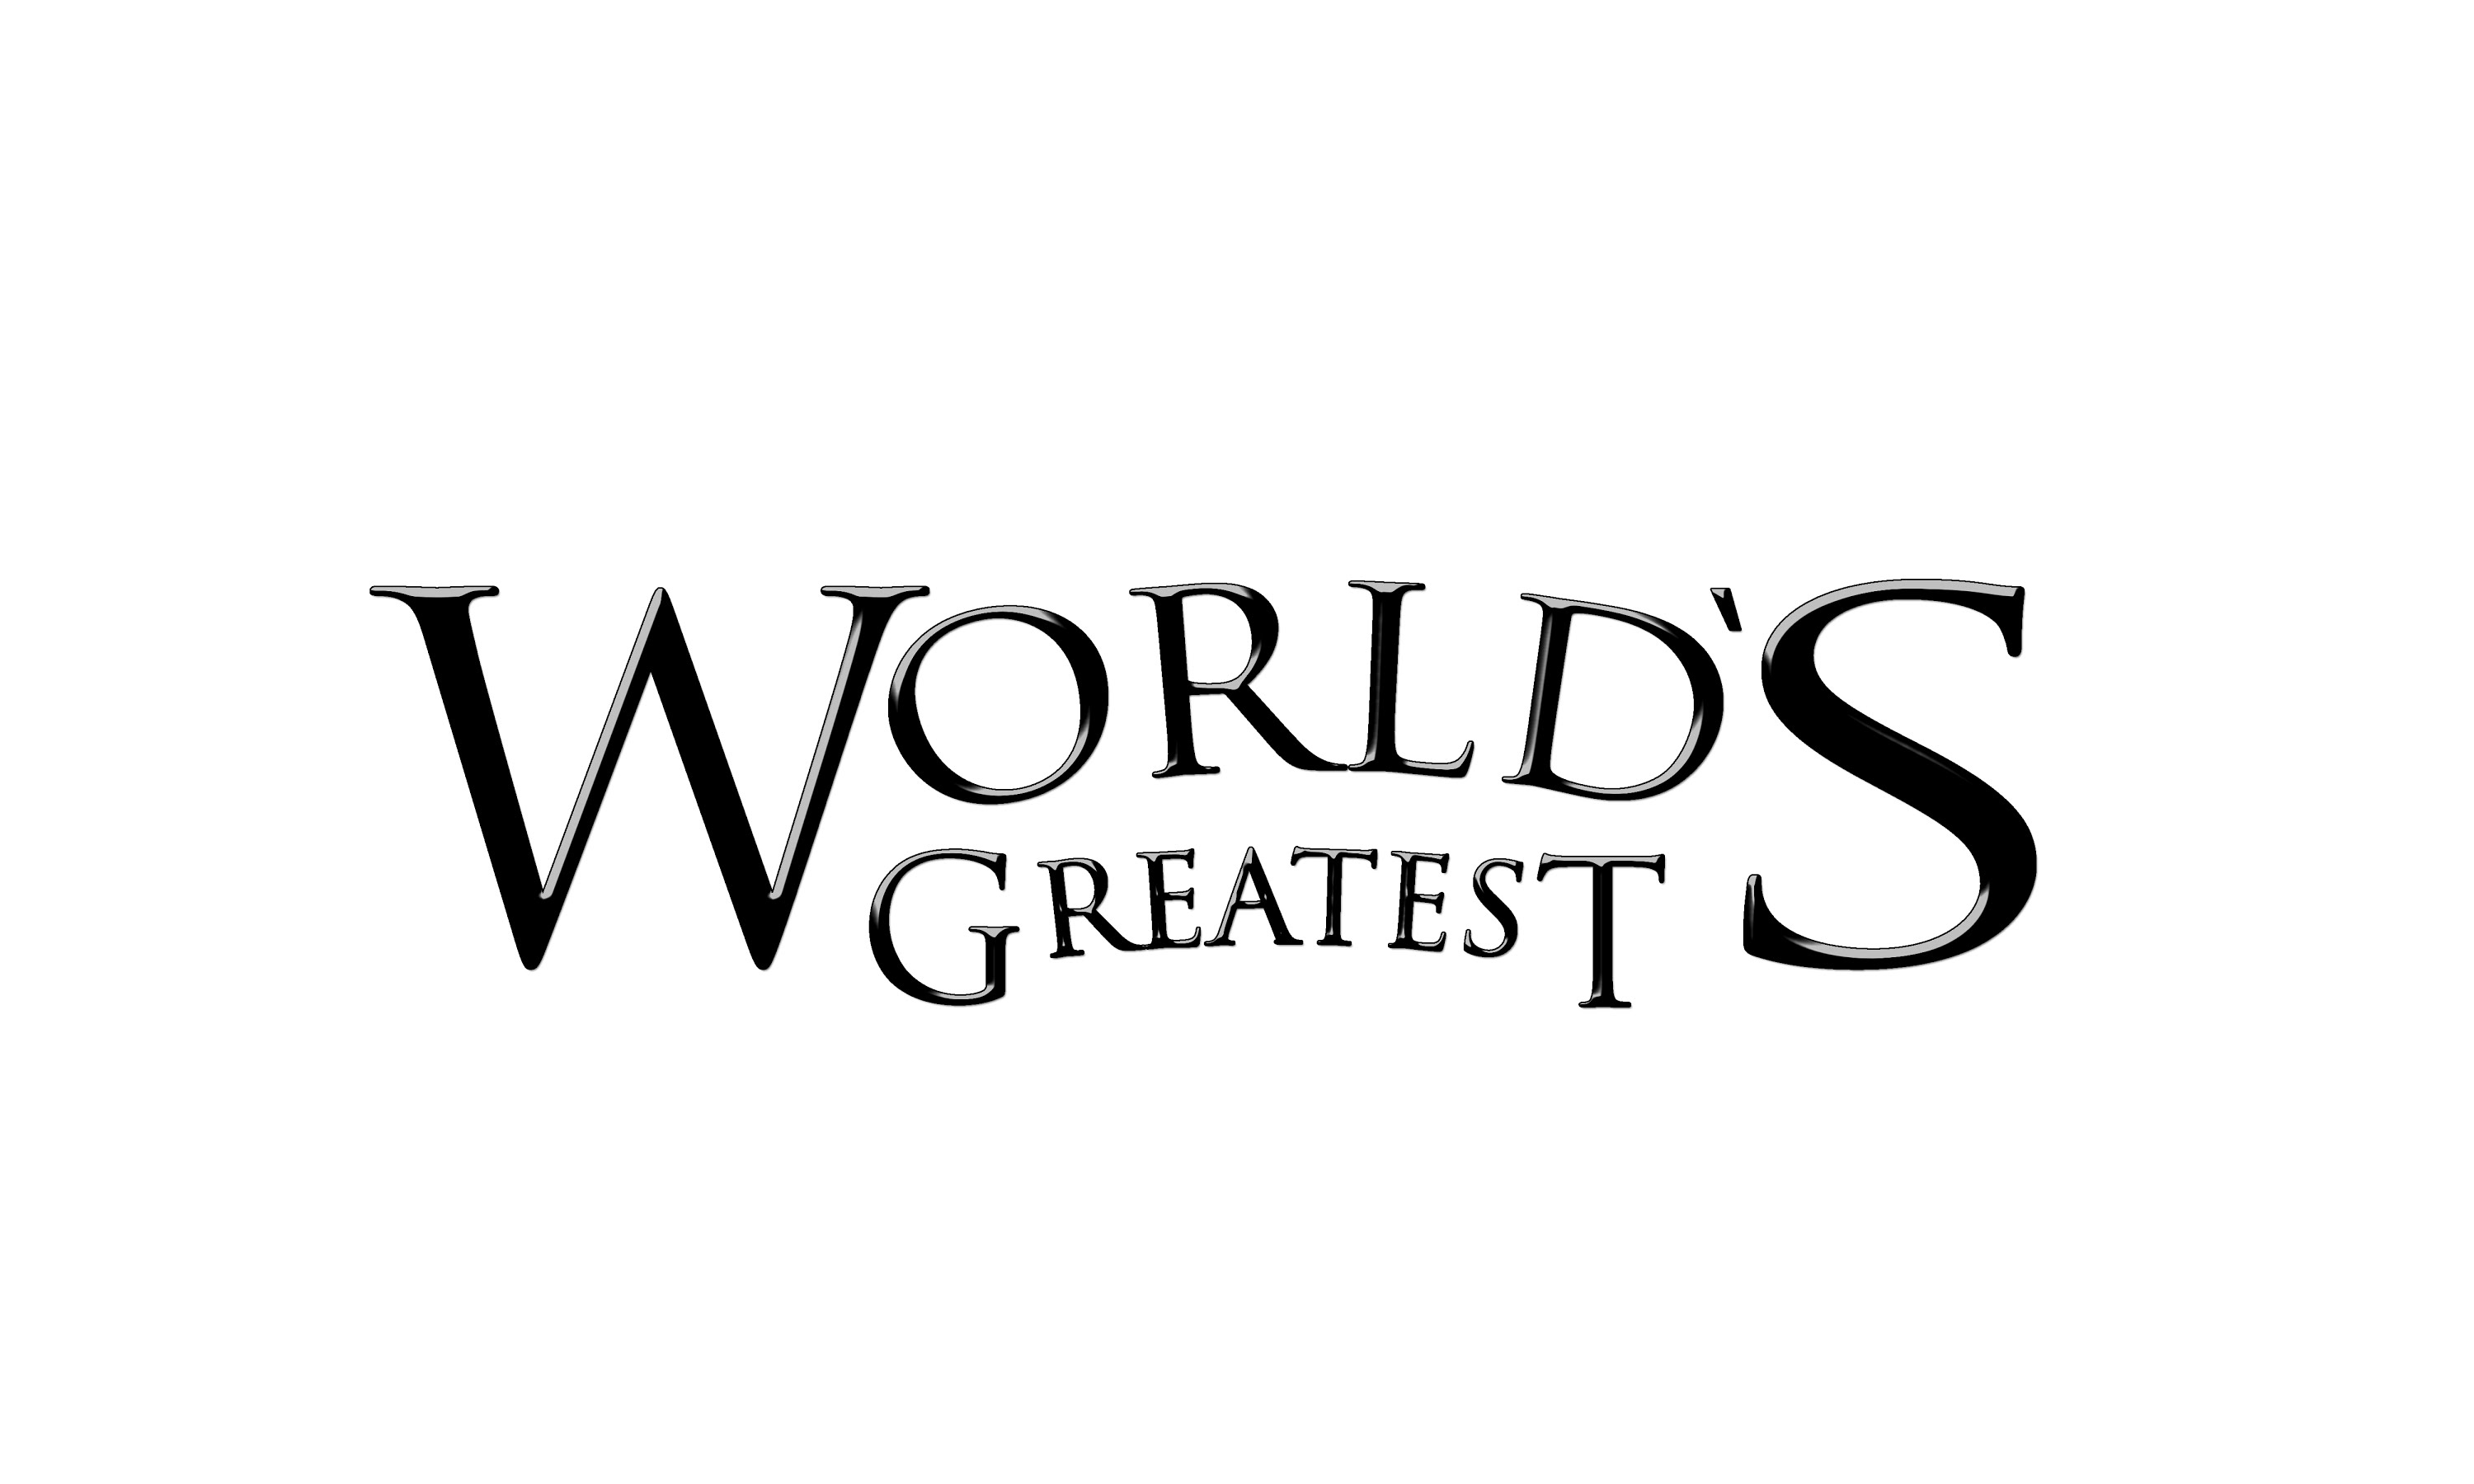 How2Media announces that Avolites, Ltd. will be part of its “World’s Greatest!...” series